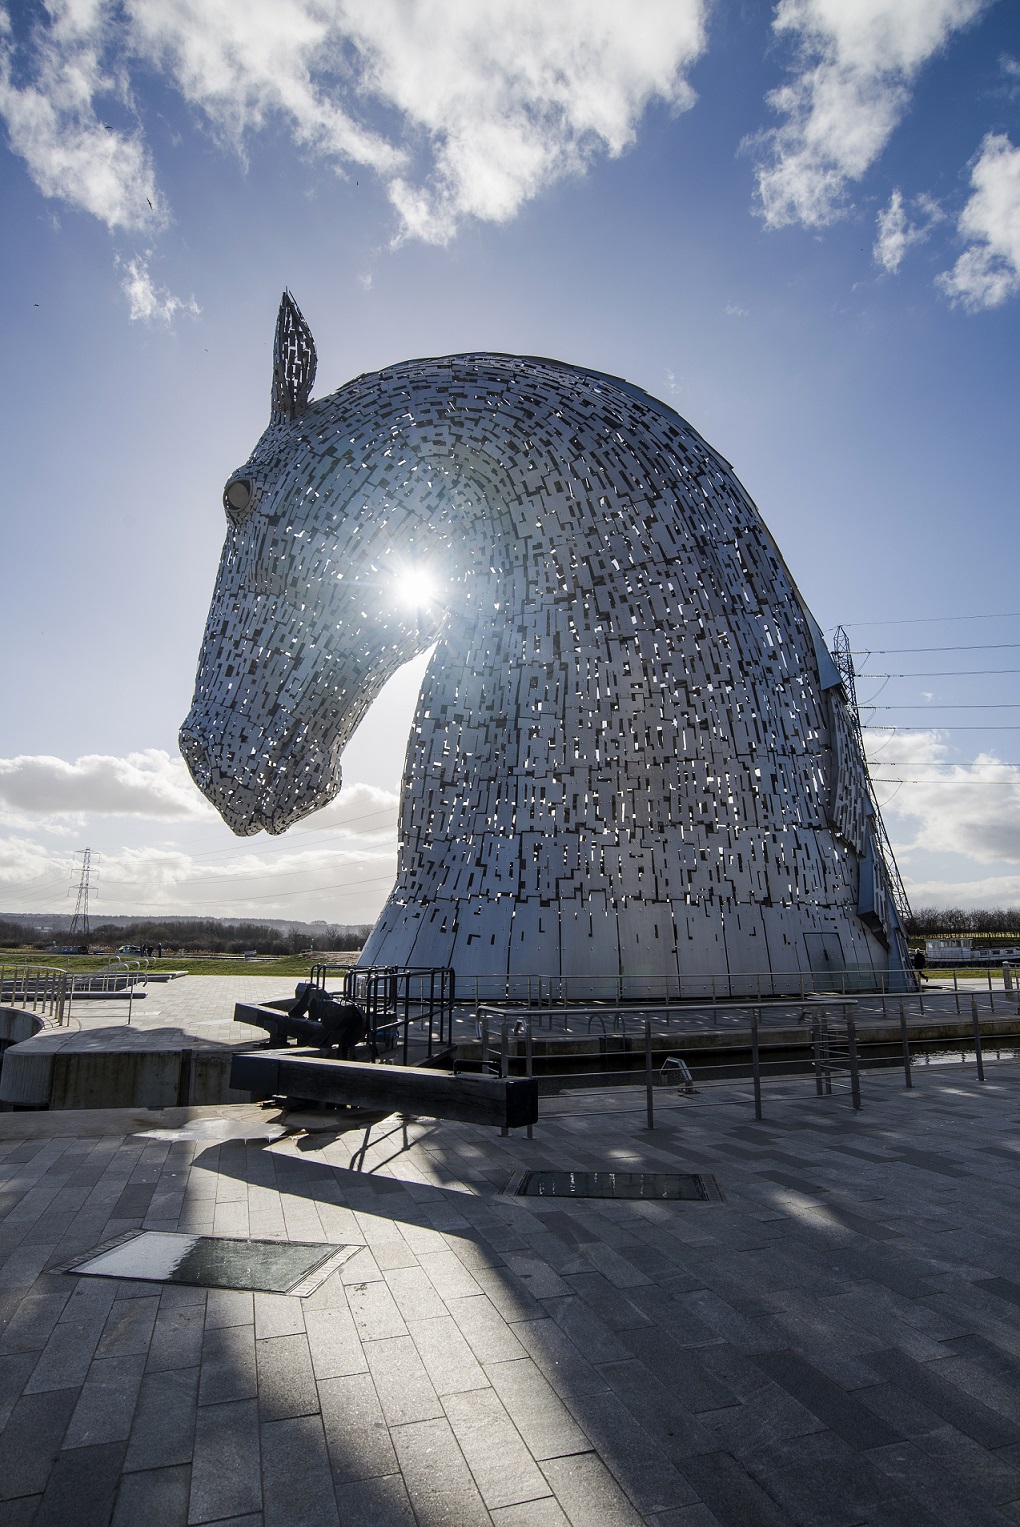 large outside sculpture of a horse head - the kelpies